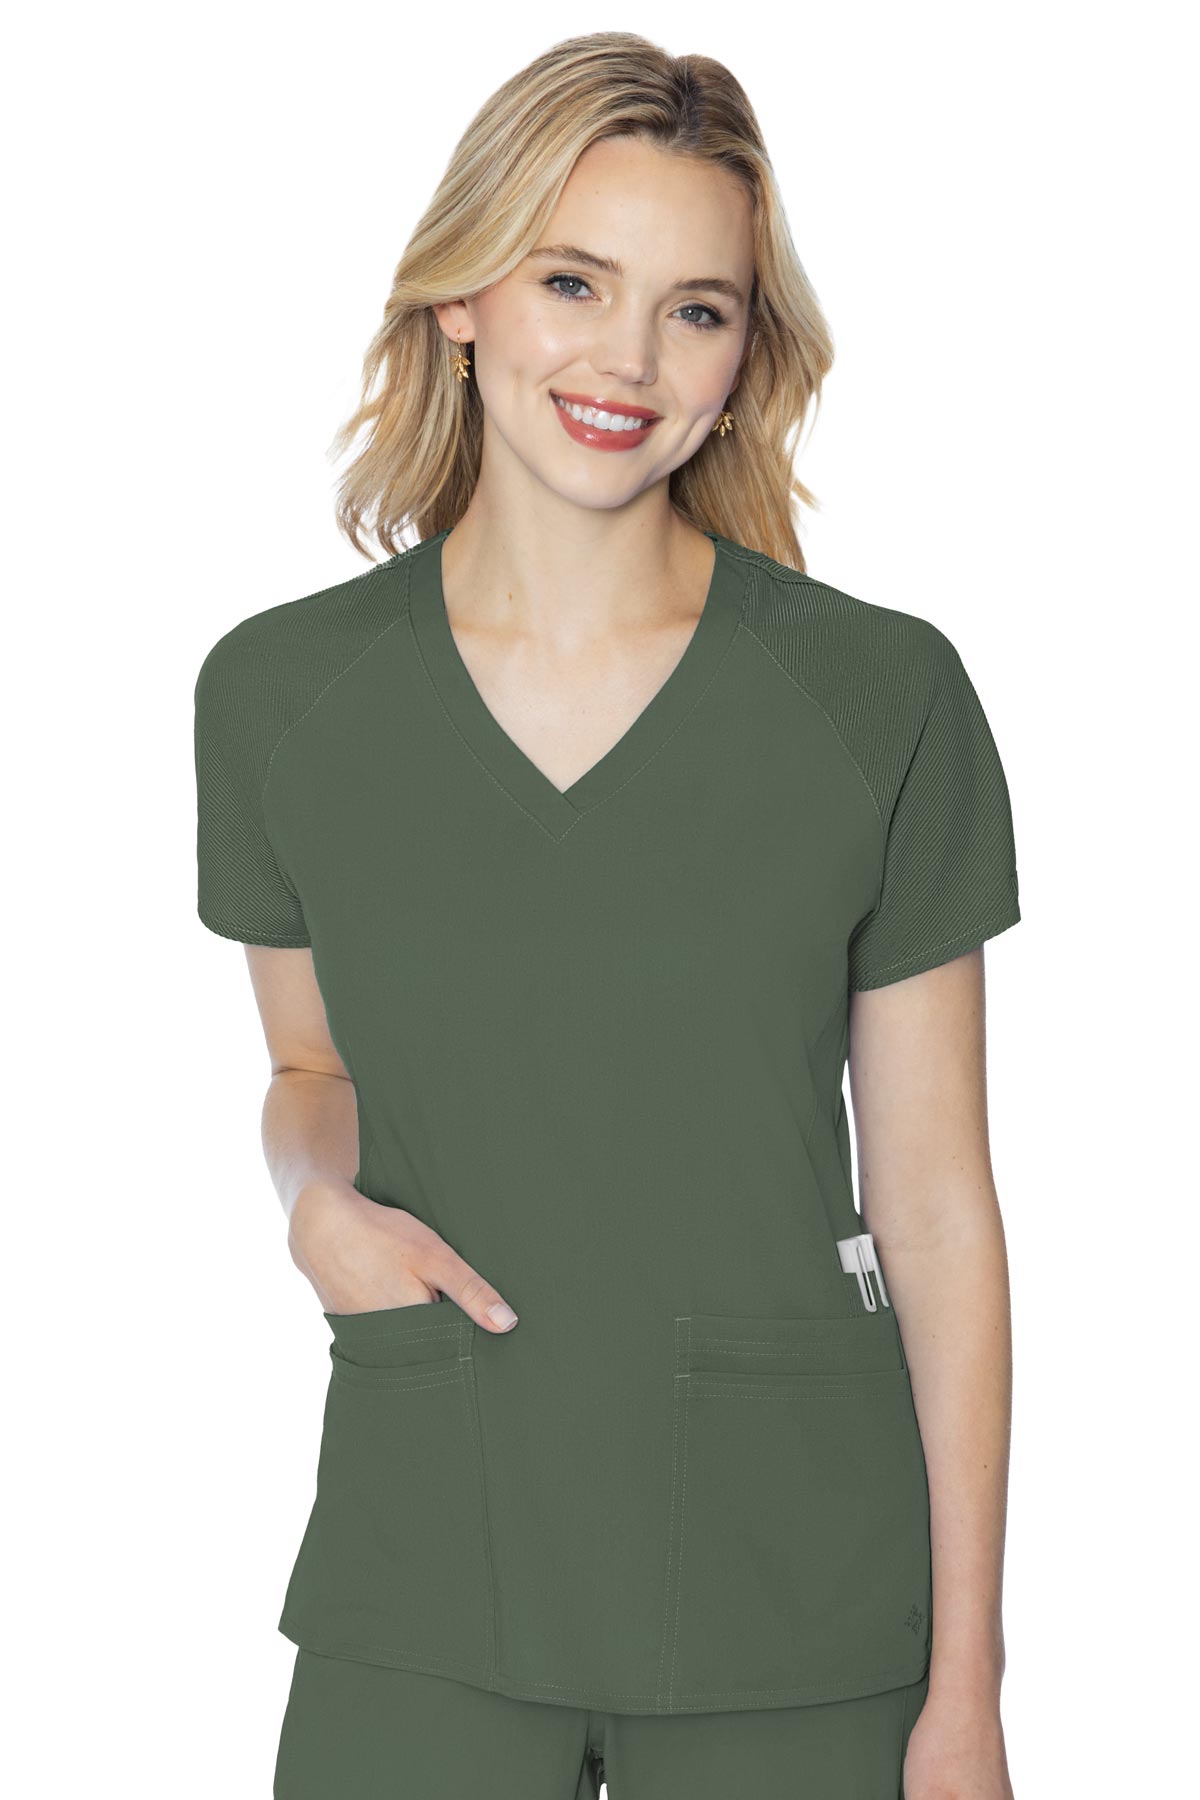 Med Couture Scrub Top Touch Raglan Sleeve in olive at Parker's Clothing and Shoes.